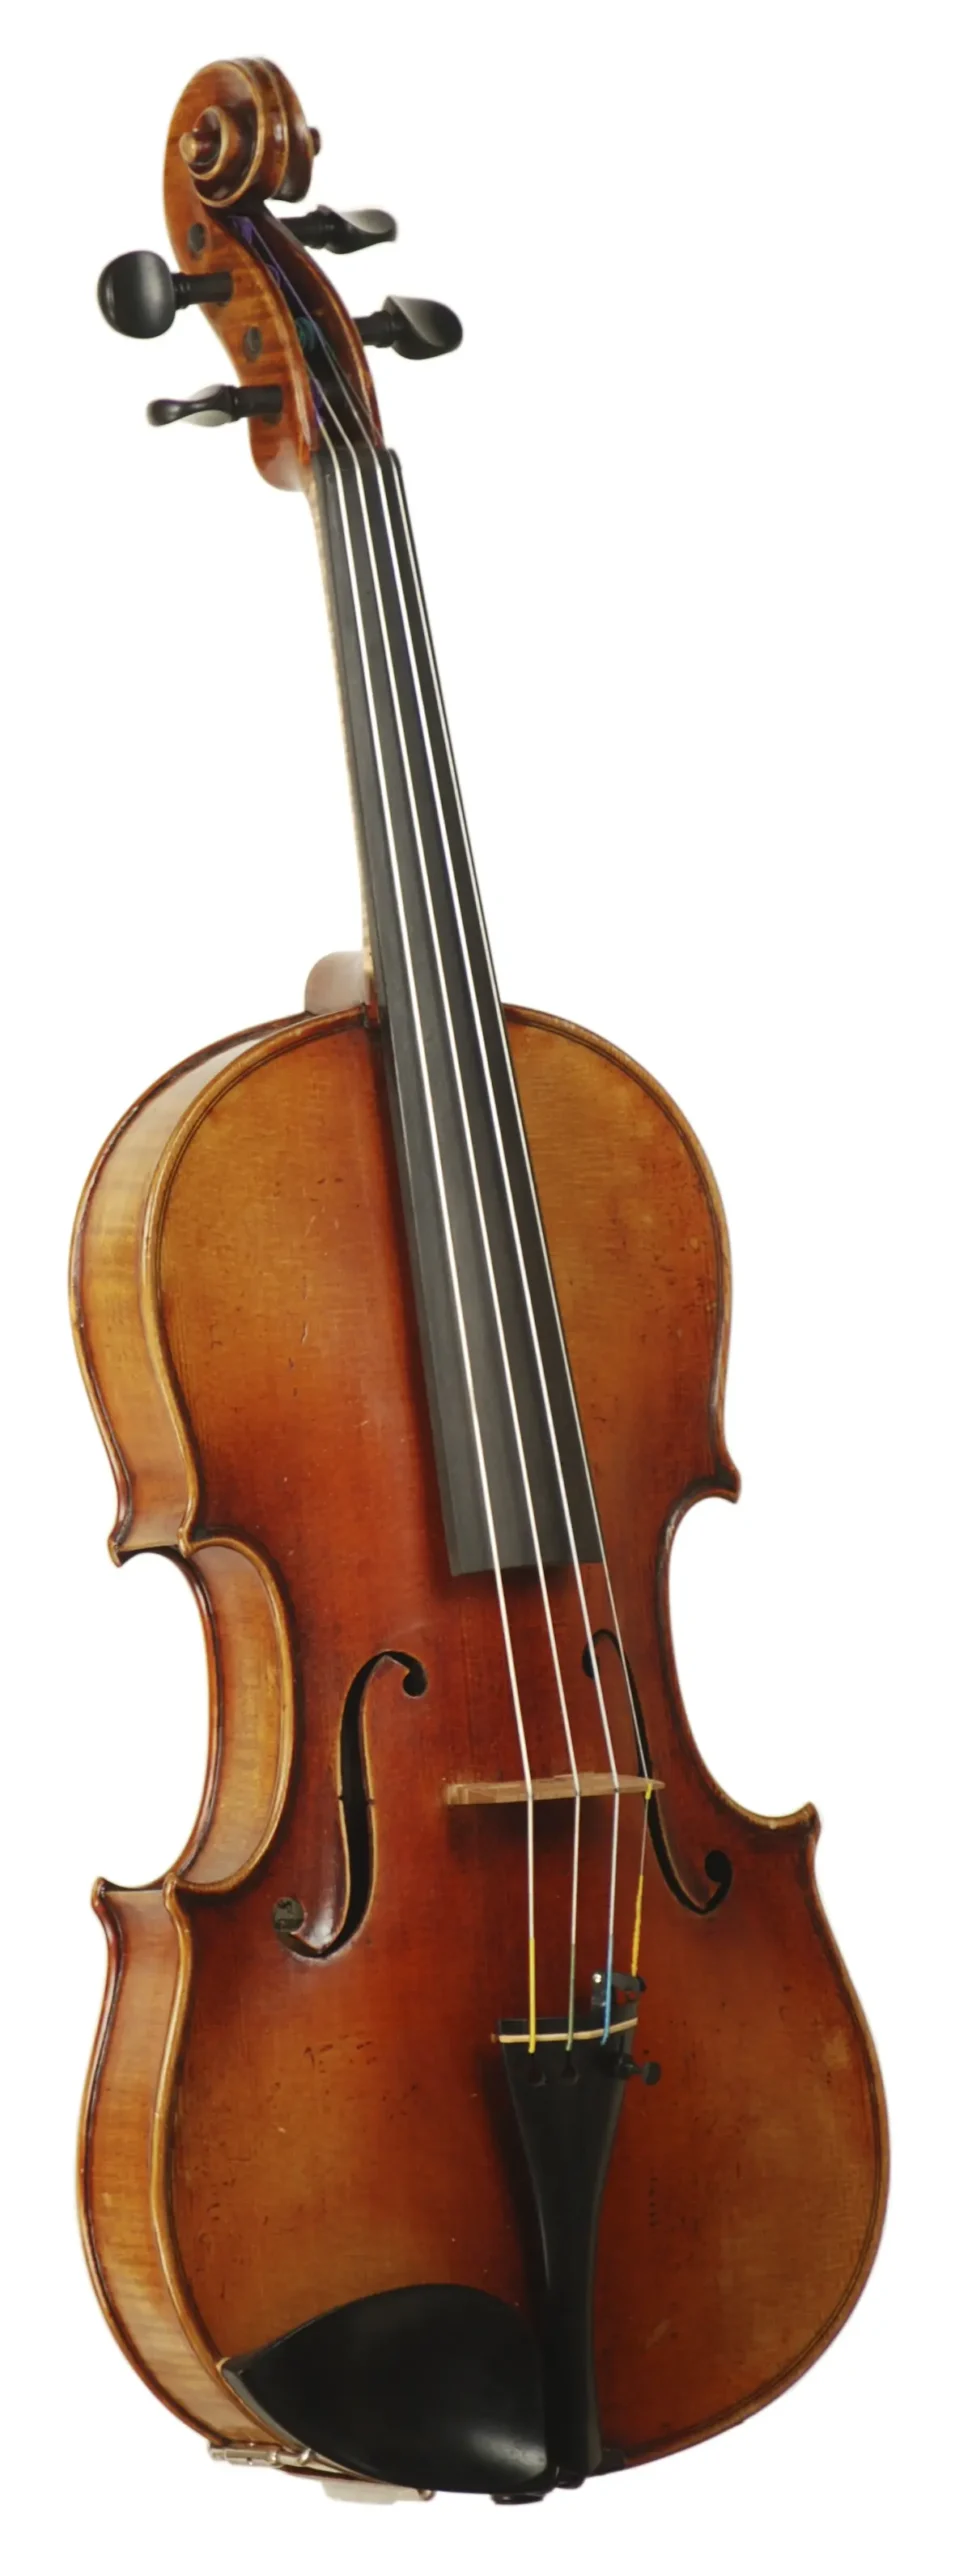 model violin - What is a student model violin